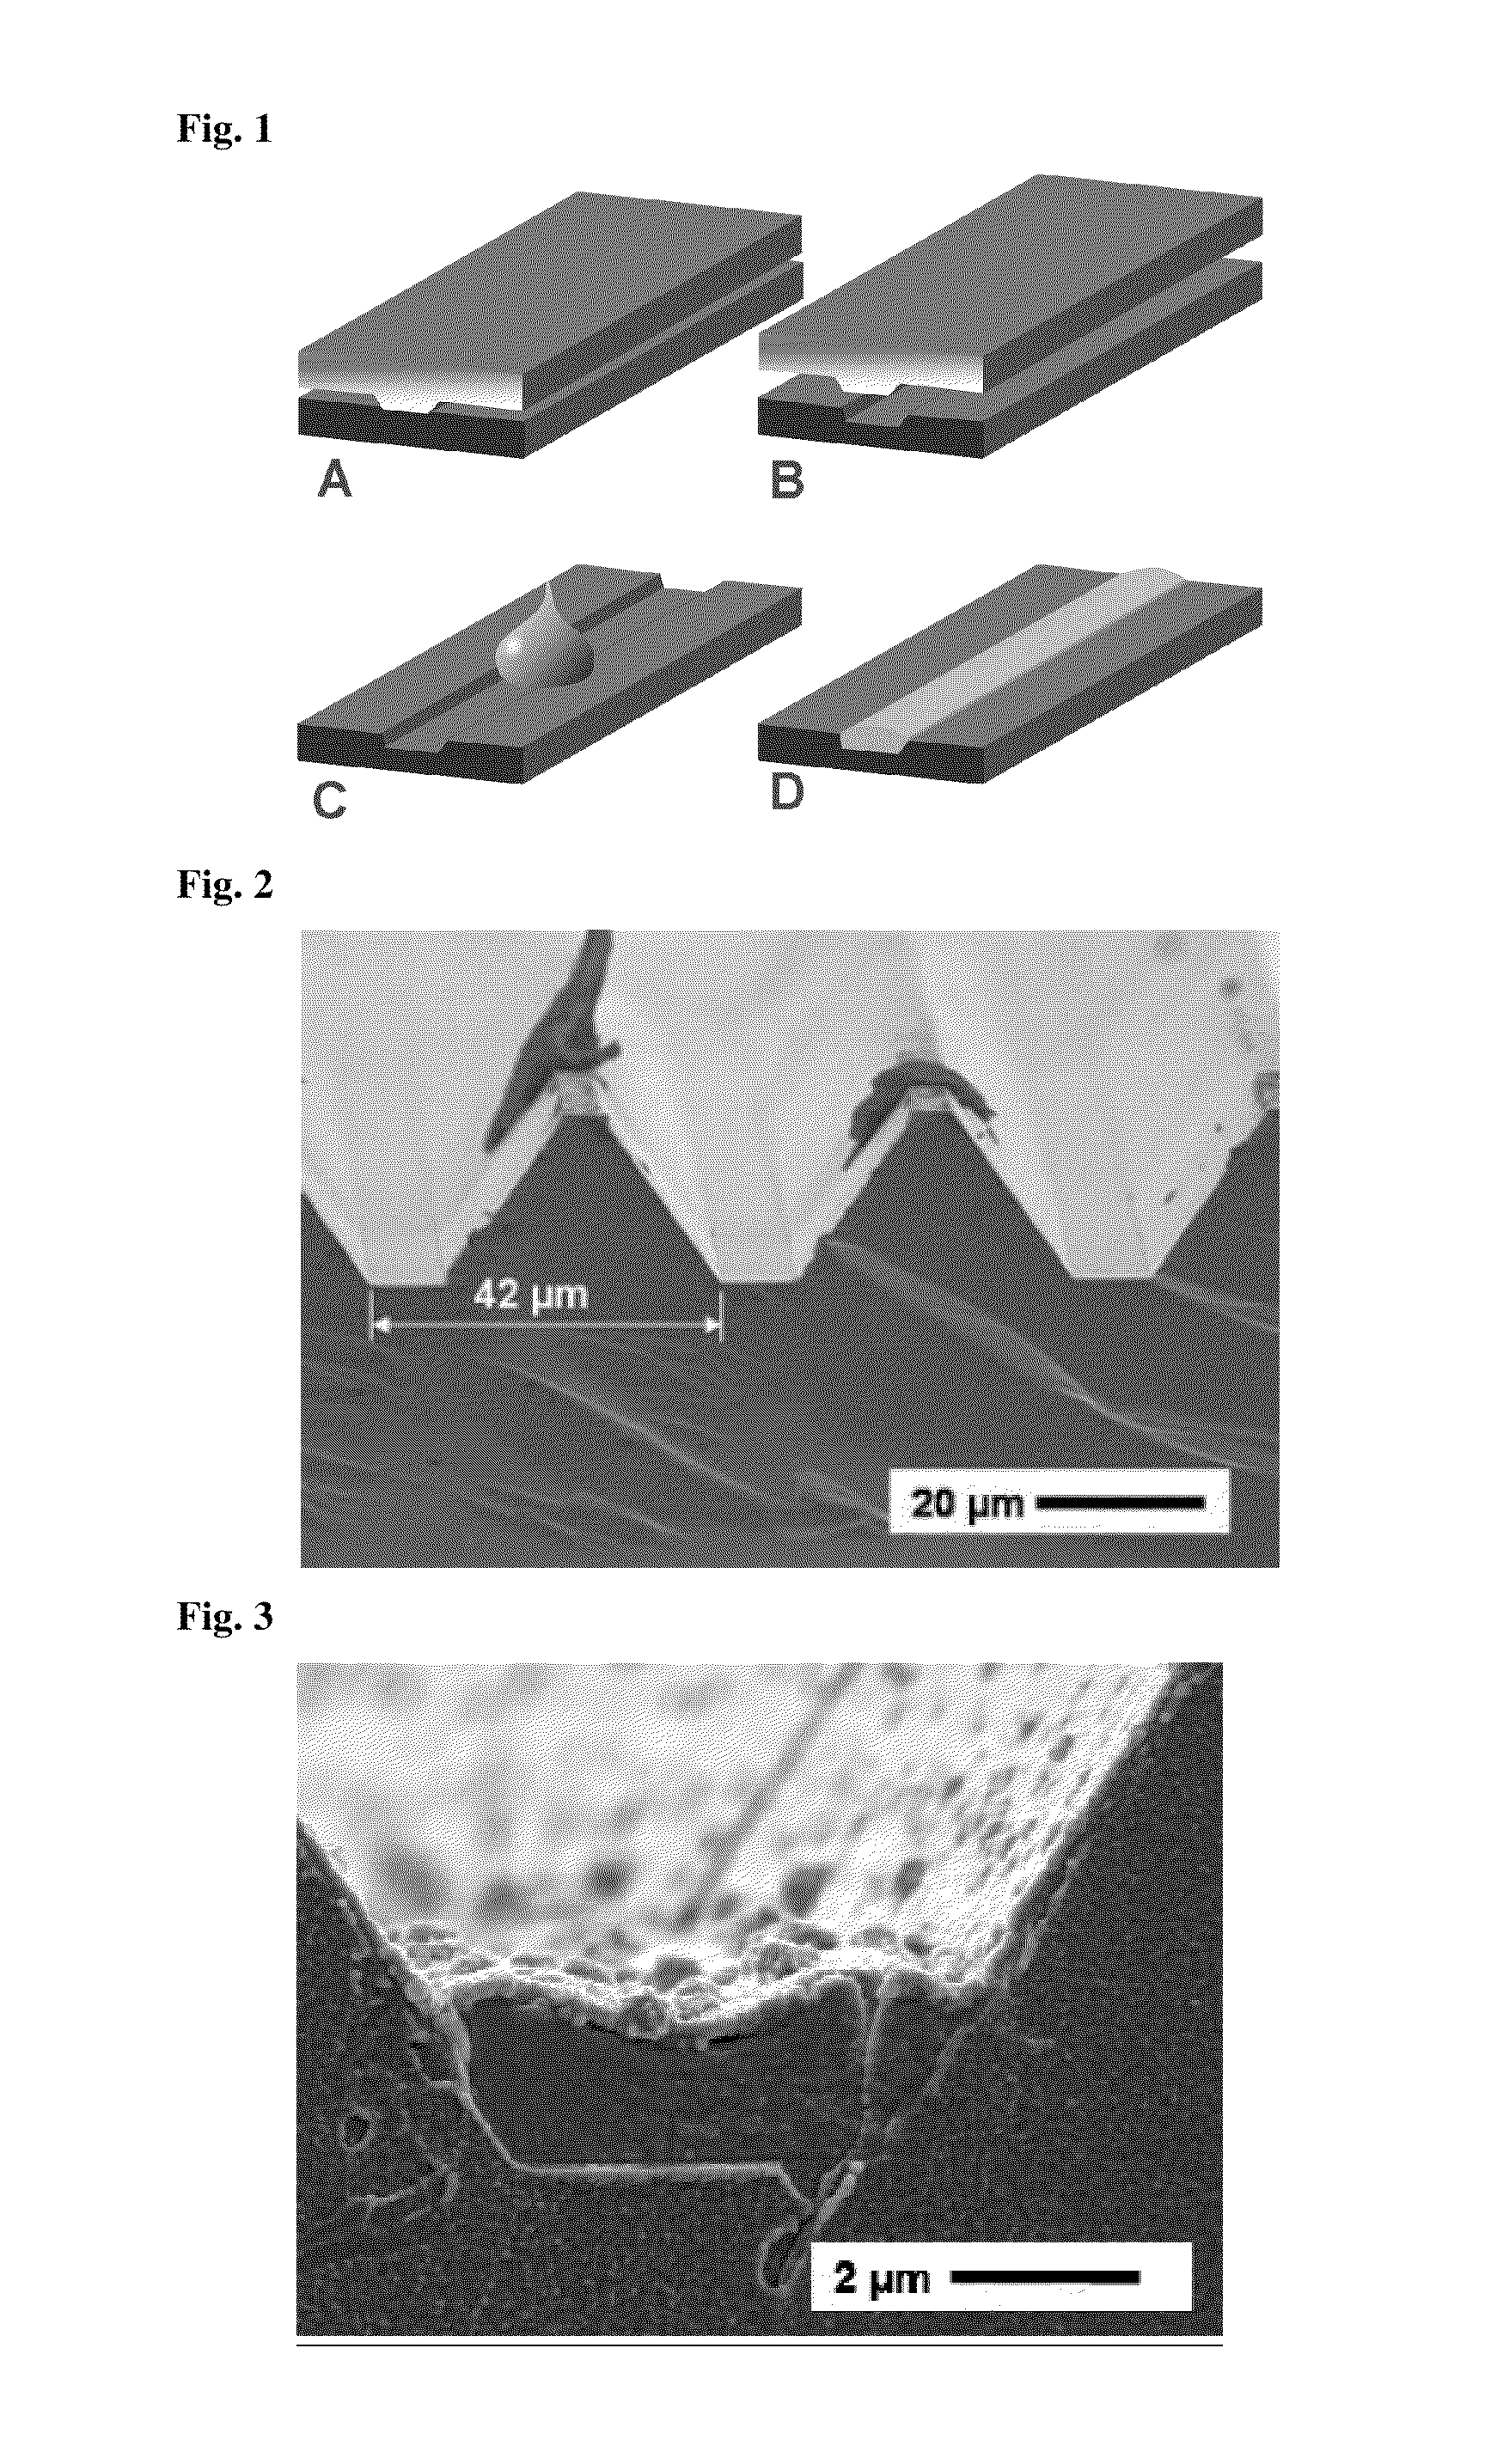 Method for fabricating minute conductive structures on surfaces